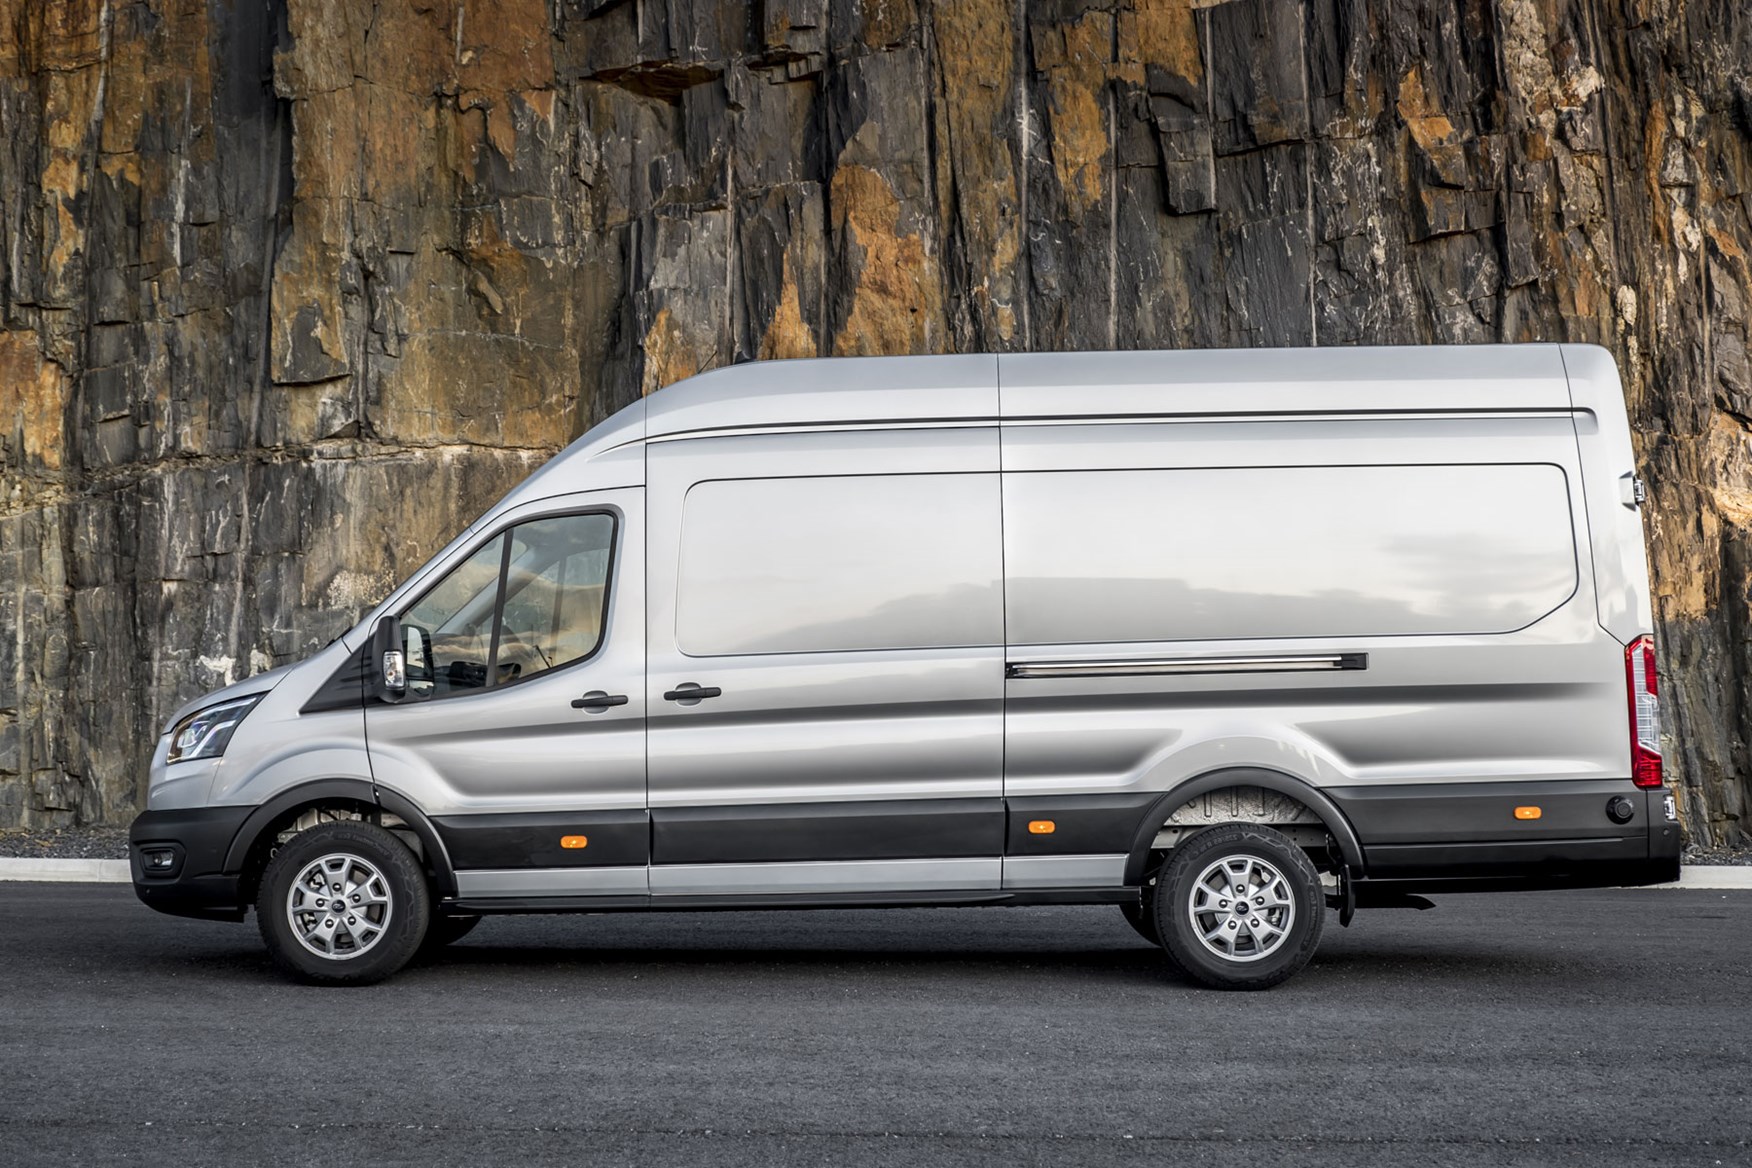 Ford Transit dimensions - 2019 facelift model, side view, panel van, L4, silver